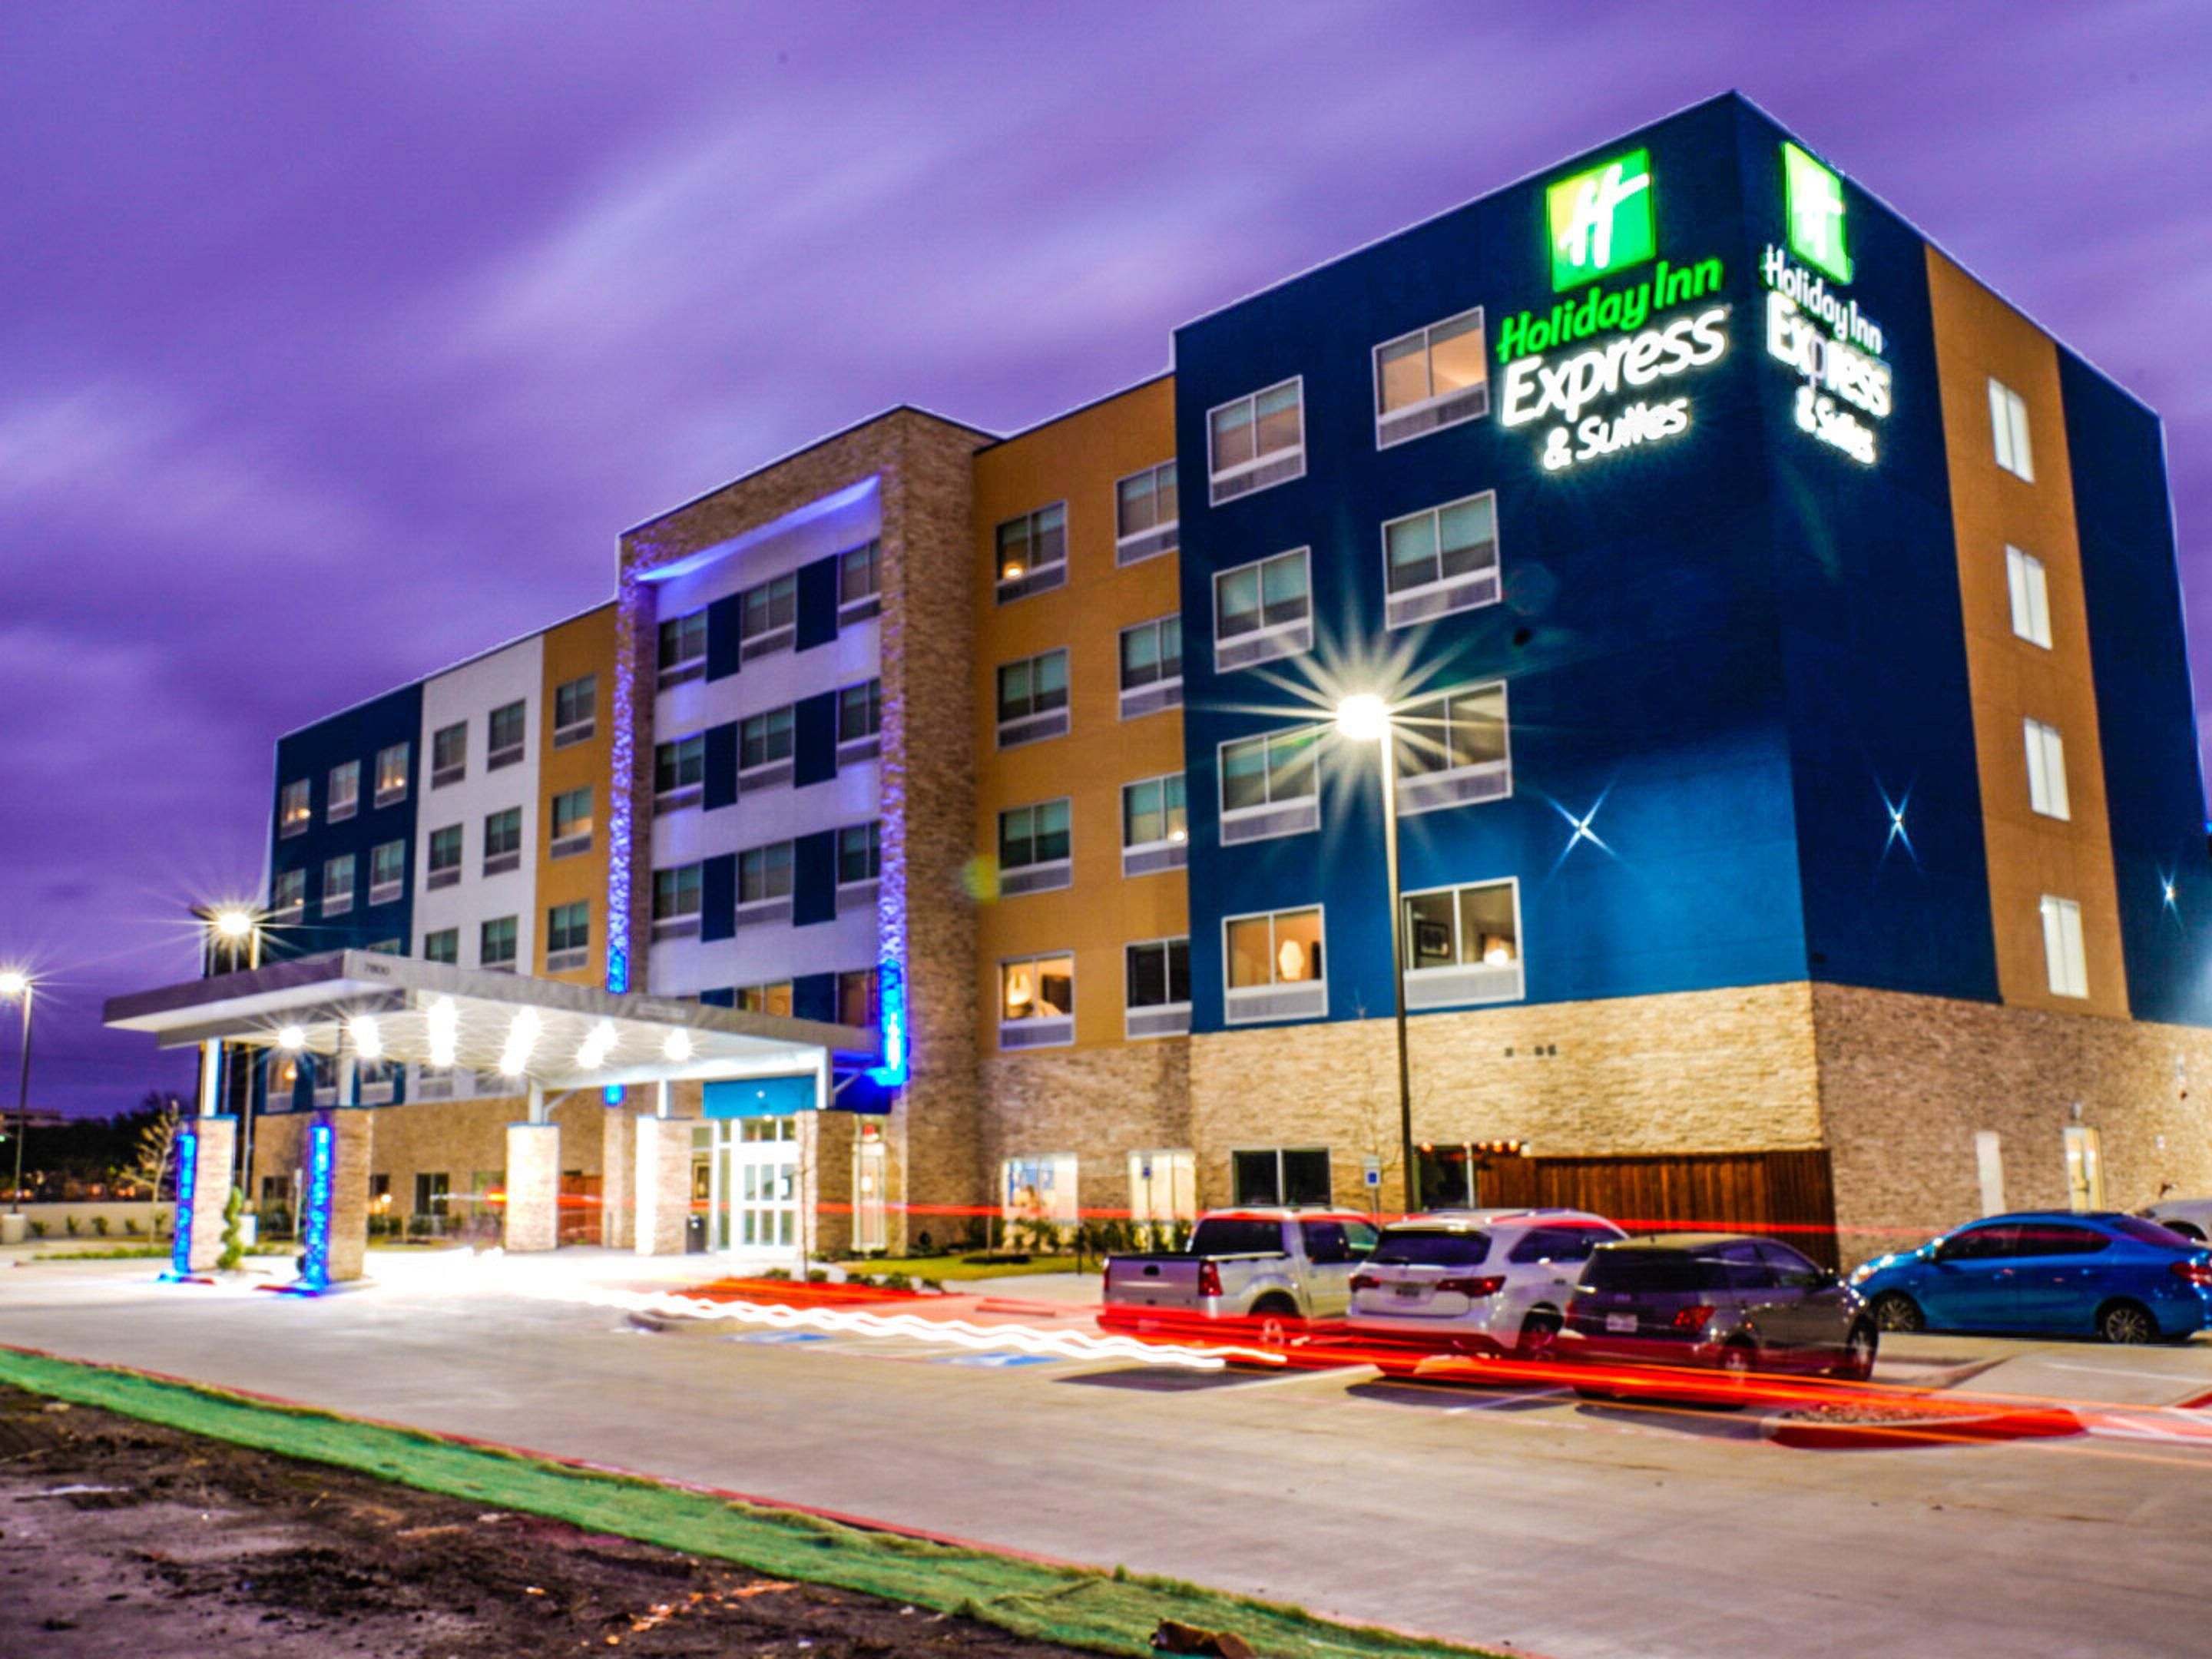 Hotels near Love Field Airport  Candlewood Suites Dallas Market Cntr-Love  Field